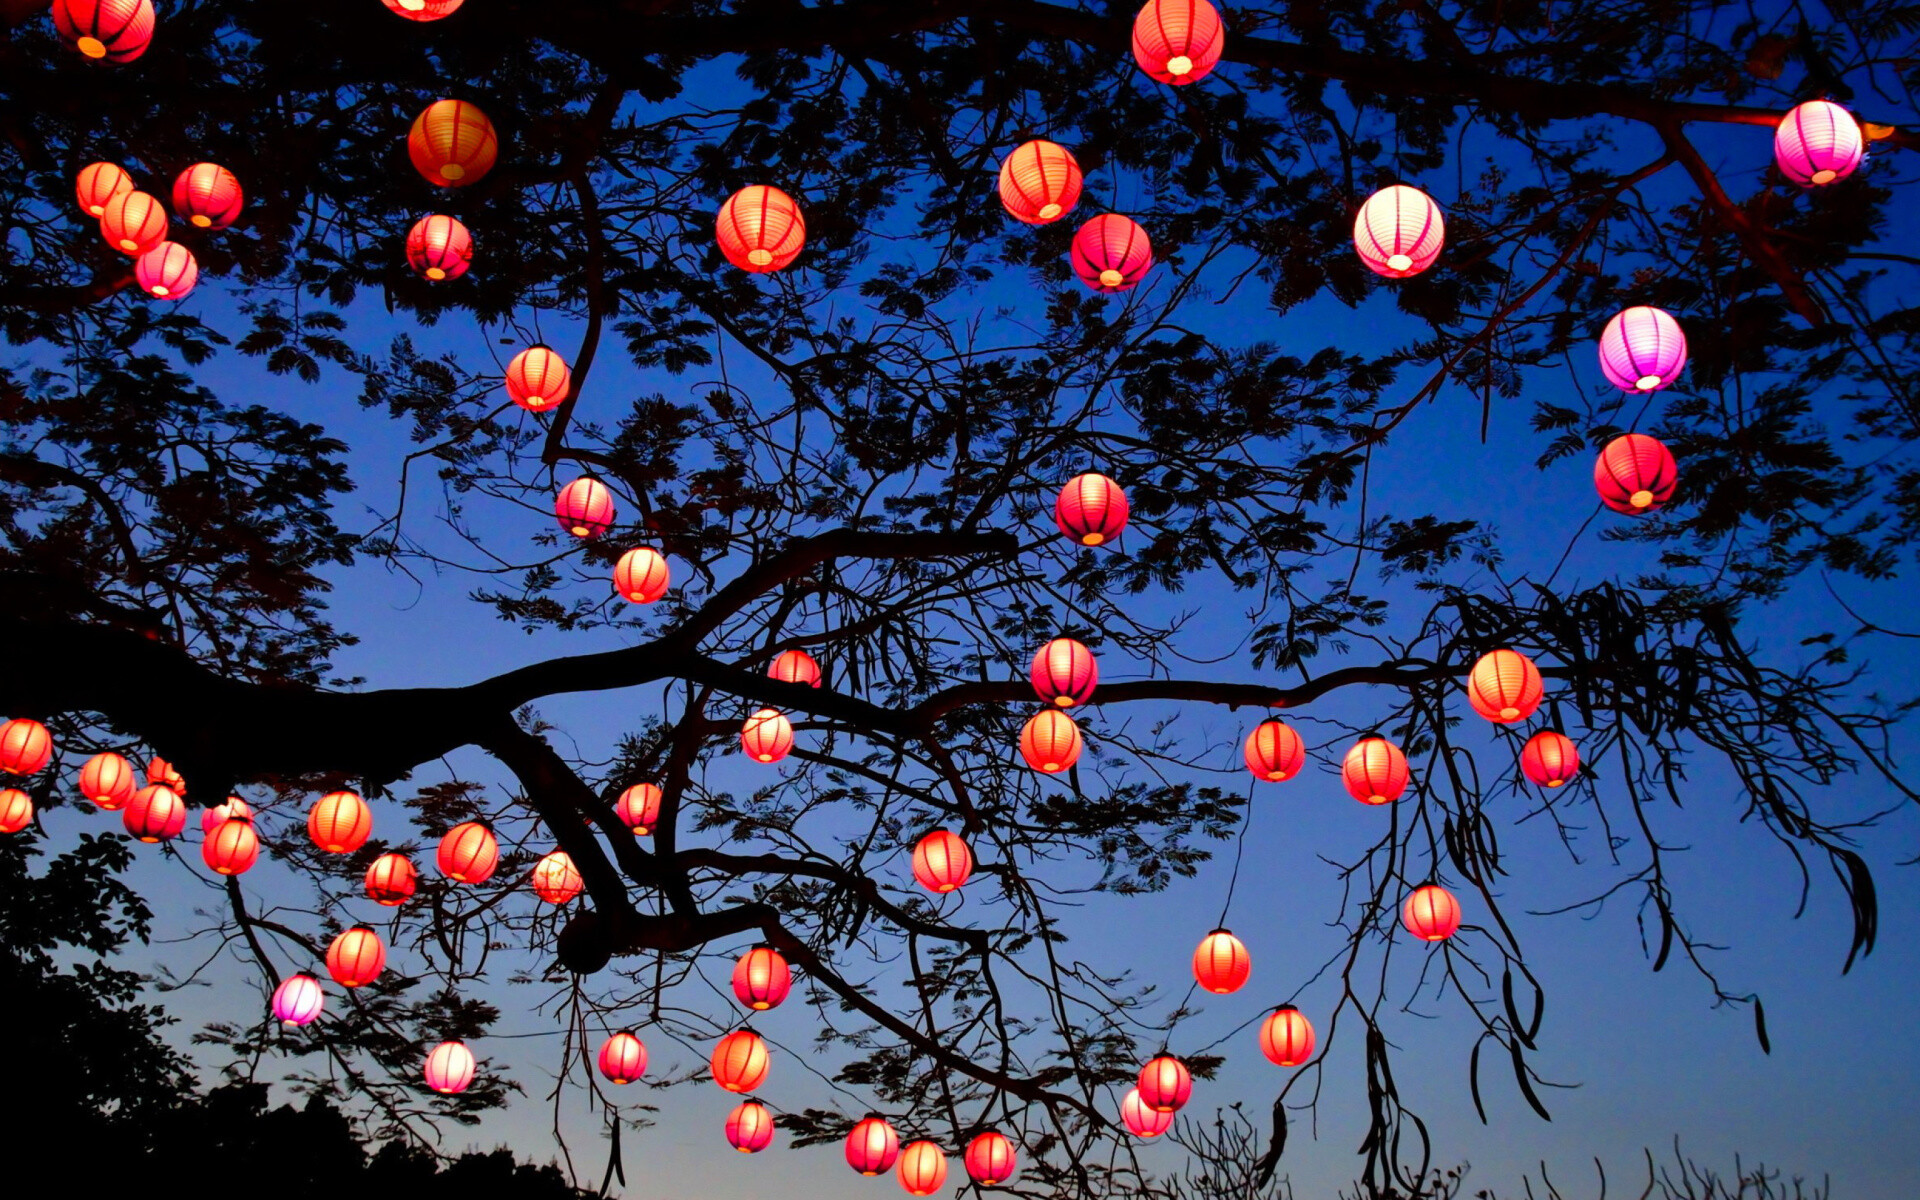 Lanterns: Chinese New Year, A portable light with a protective covering. 1920x1200 HD Wallpaper.